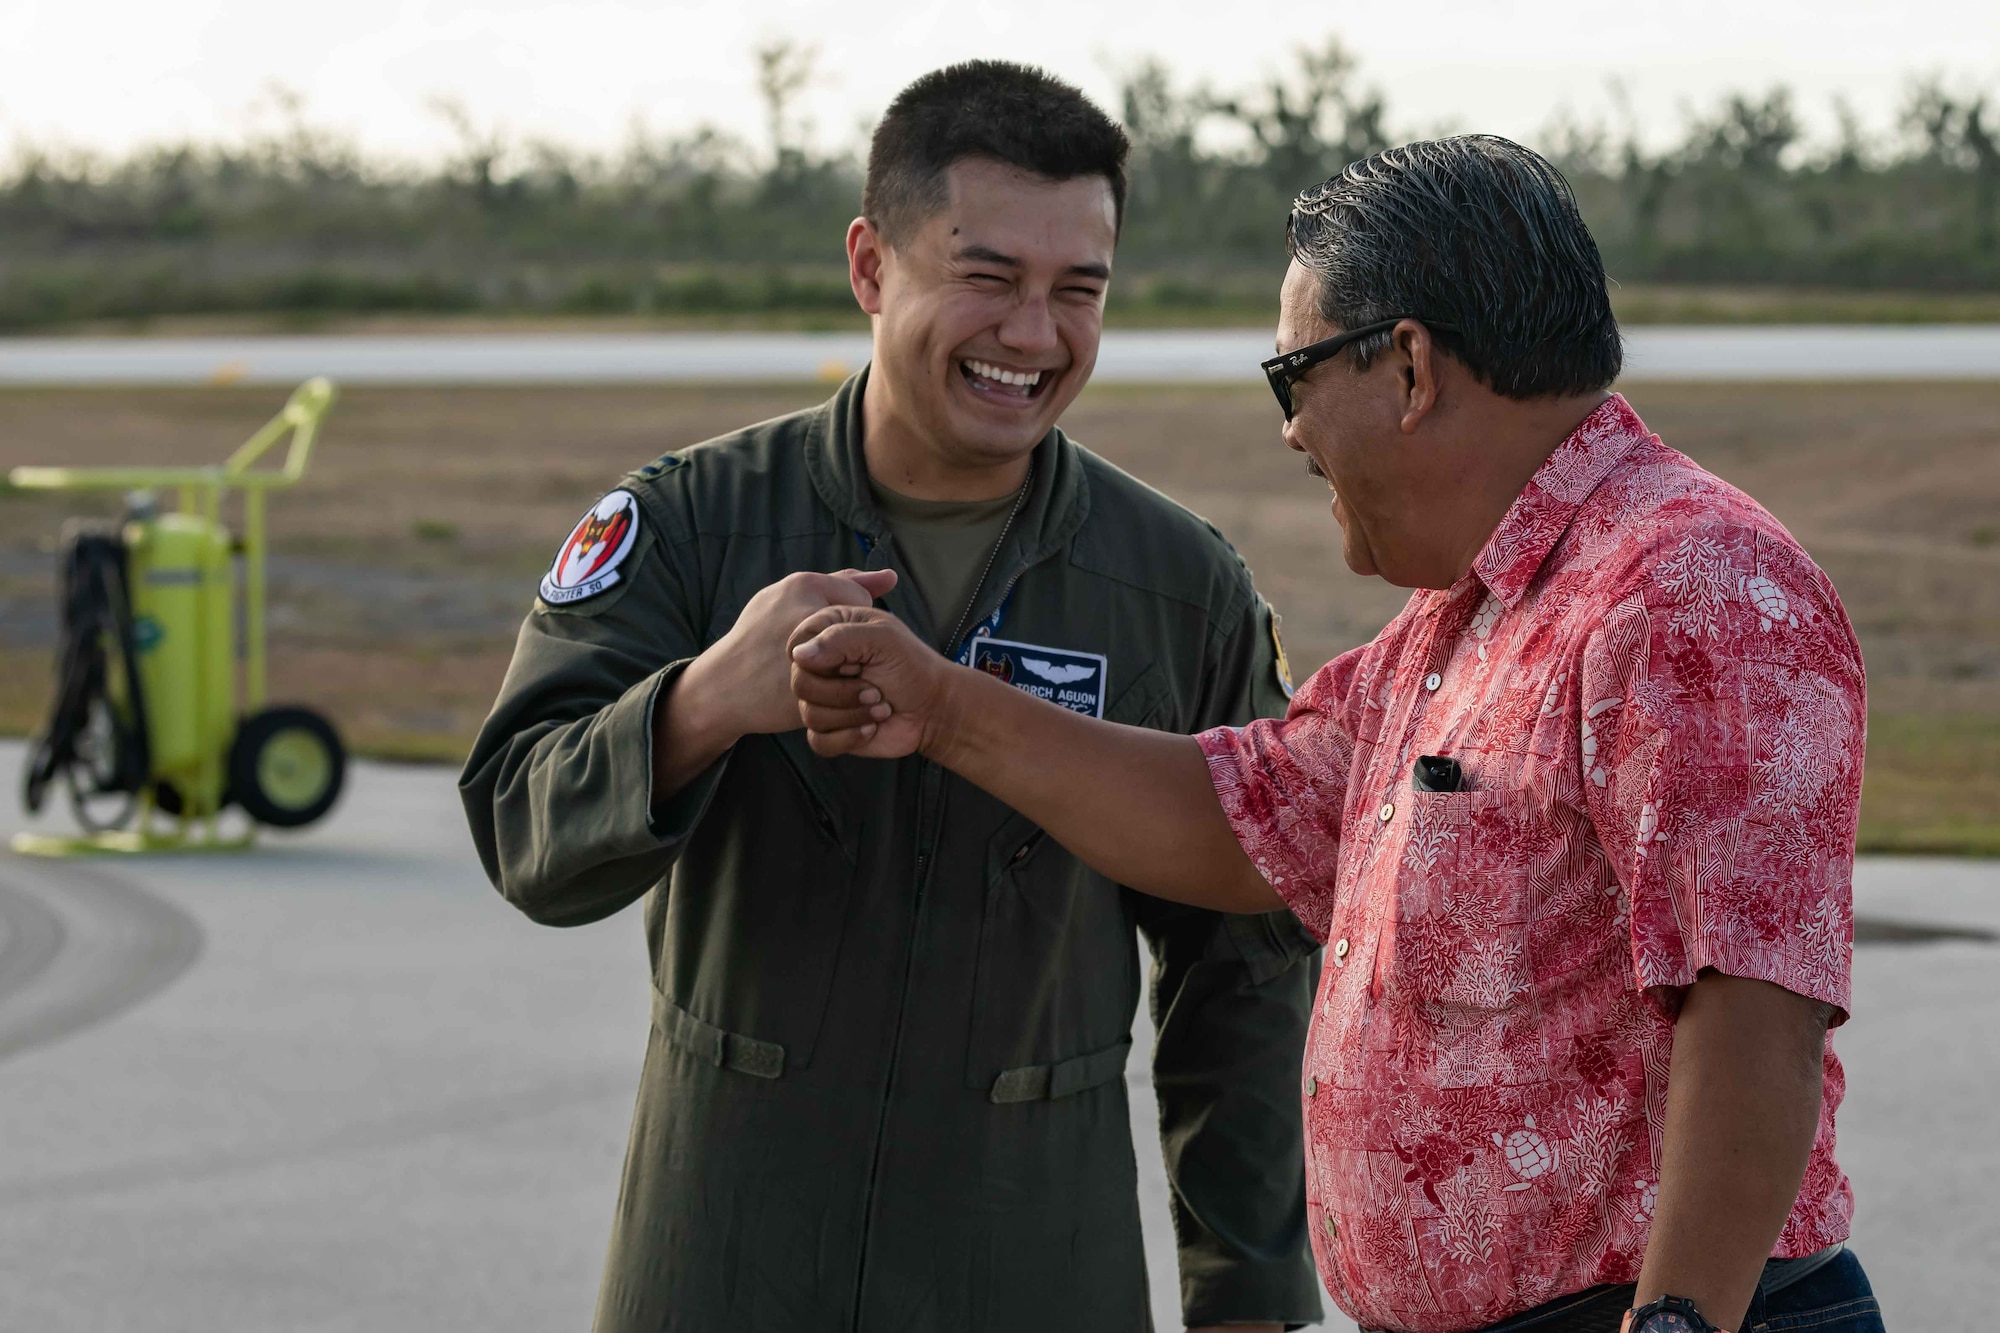 U.S. Air Force Capt. Celestino Aguon meets with Tinian Mayor Edwin P. Aldan at Tinian International Airport, Tinian, during exercise Resilient Typhoon, April 23, 2019.  The exercise was designed to increase Pacific Air Forces’ ability to rapidly deploy and operate from airfields throughout the region.  (U.S. Air Force photo by Airman 1st Class Matthew Seefeldt)